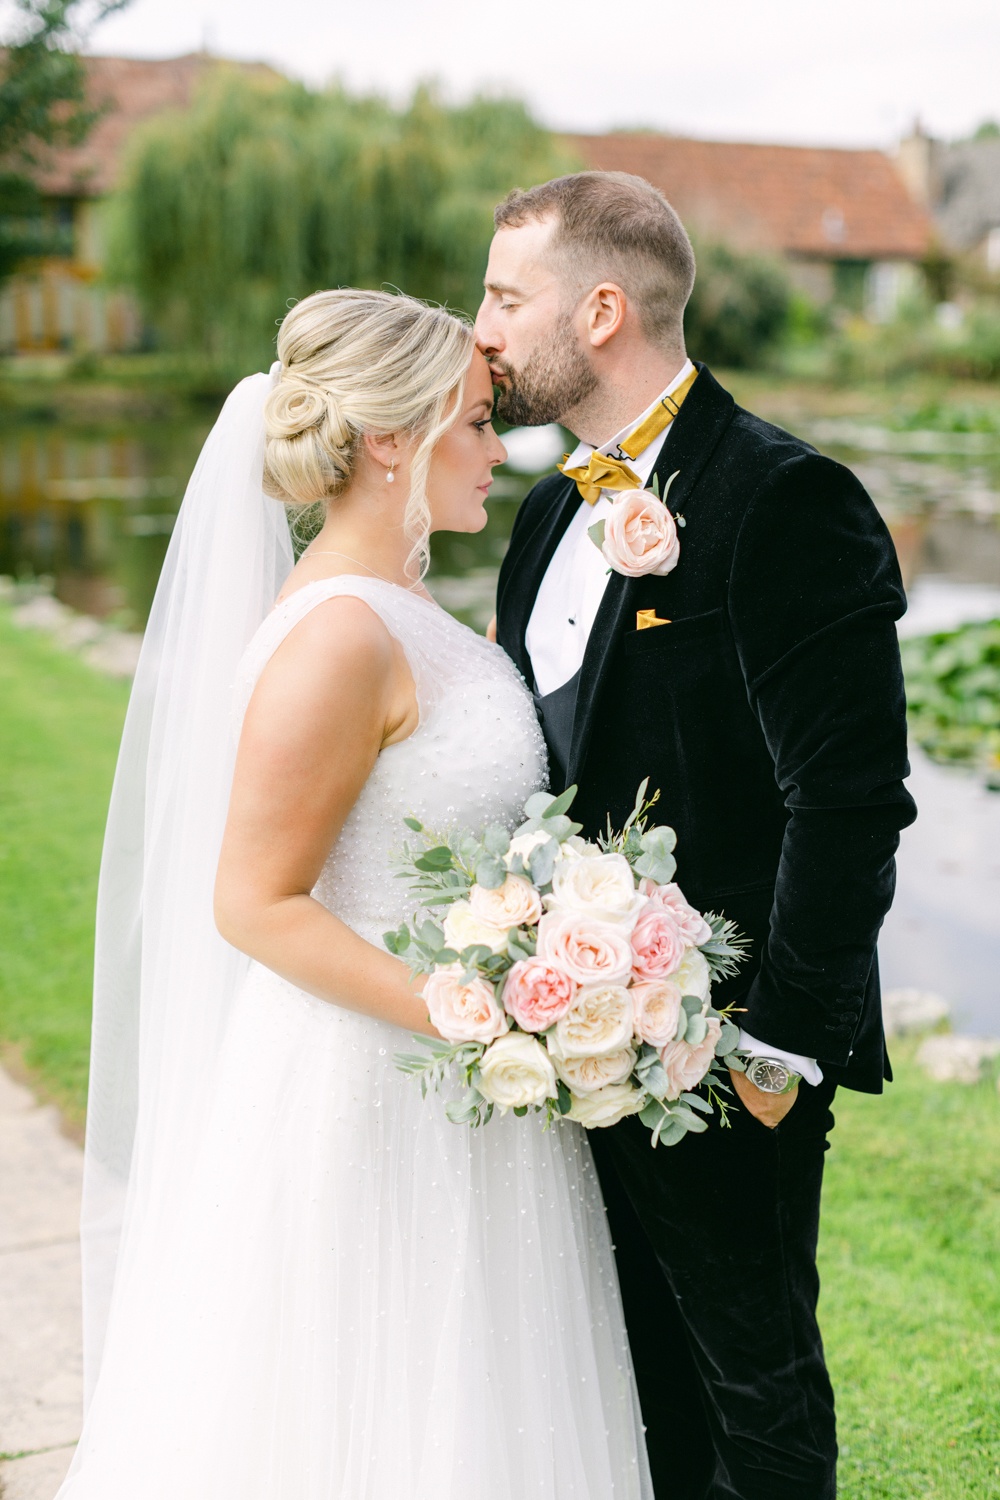 Bride and Groom take romantic stroll at Brinsop Court